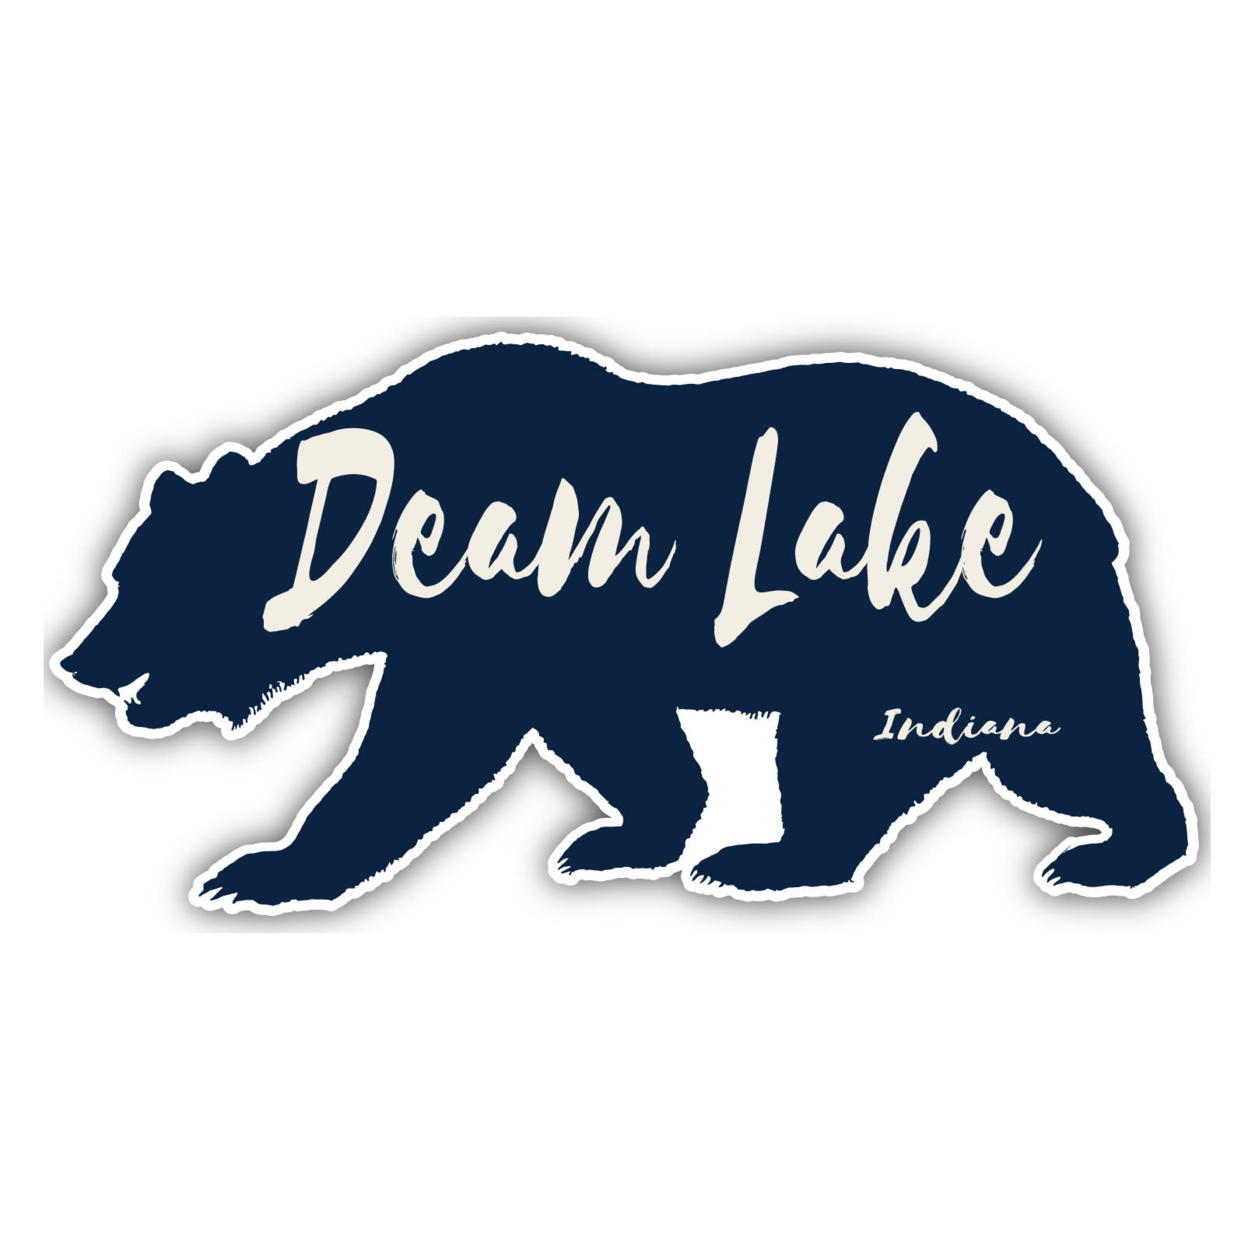 Deam Lake Indiana Souvenir Decorative Stickers (Choose Theme And Size) - 4-Pack, 8-Inch, Bear